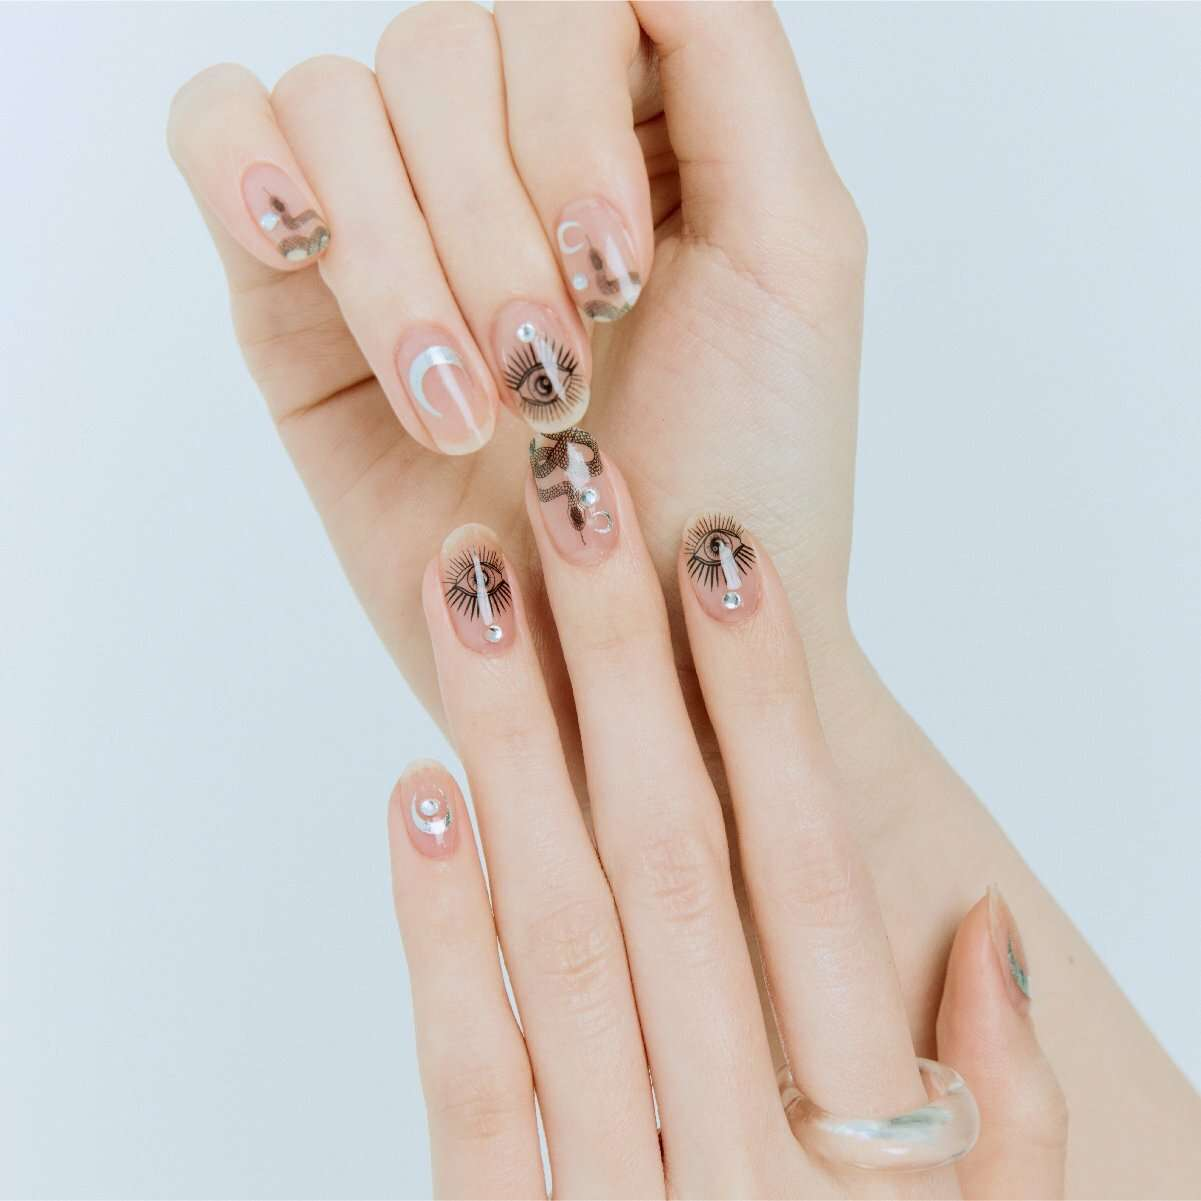 20 Beautiful & Easy Nail Art Ideas To Do At Home